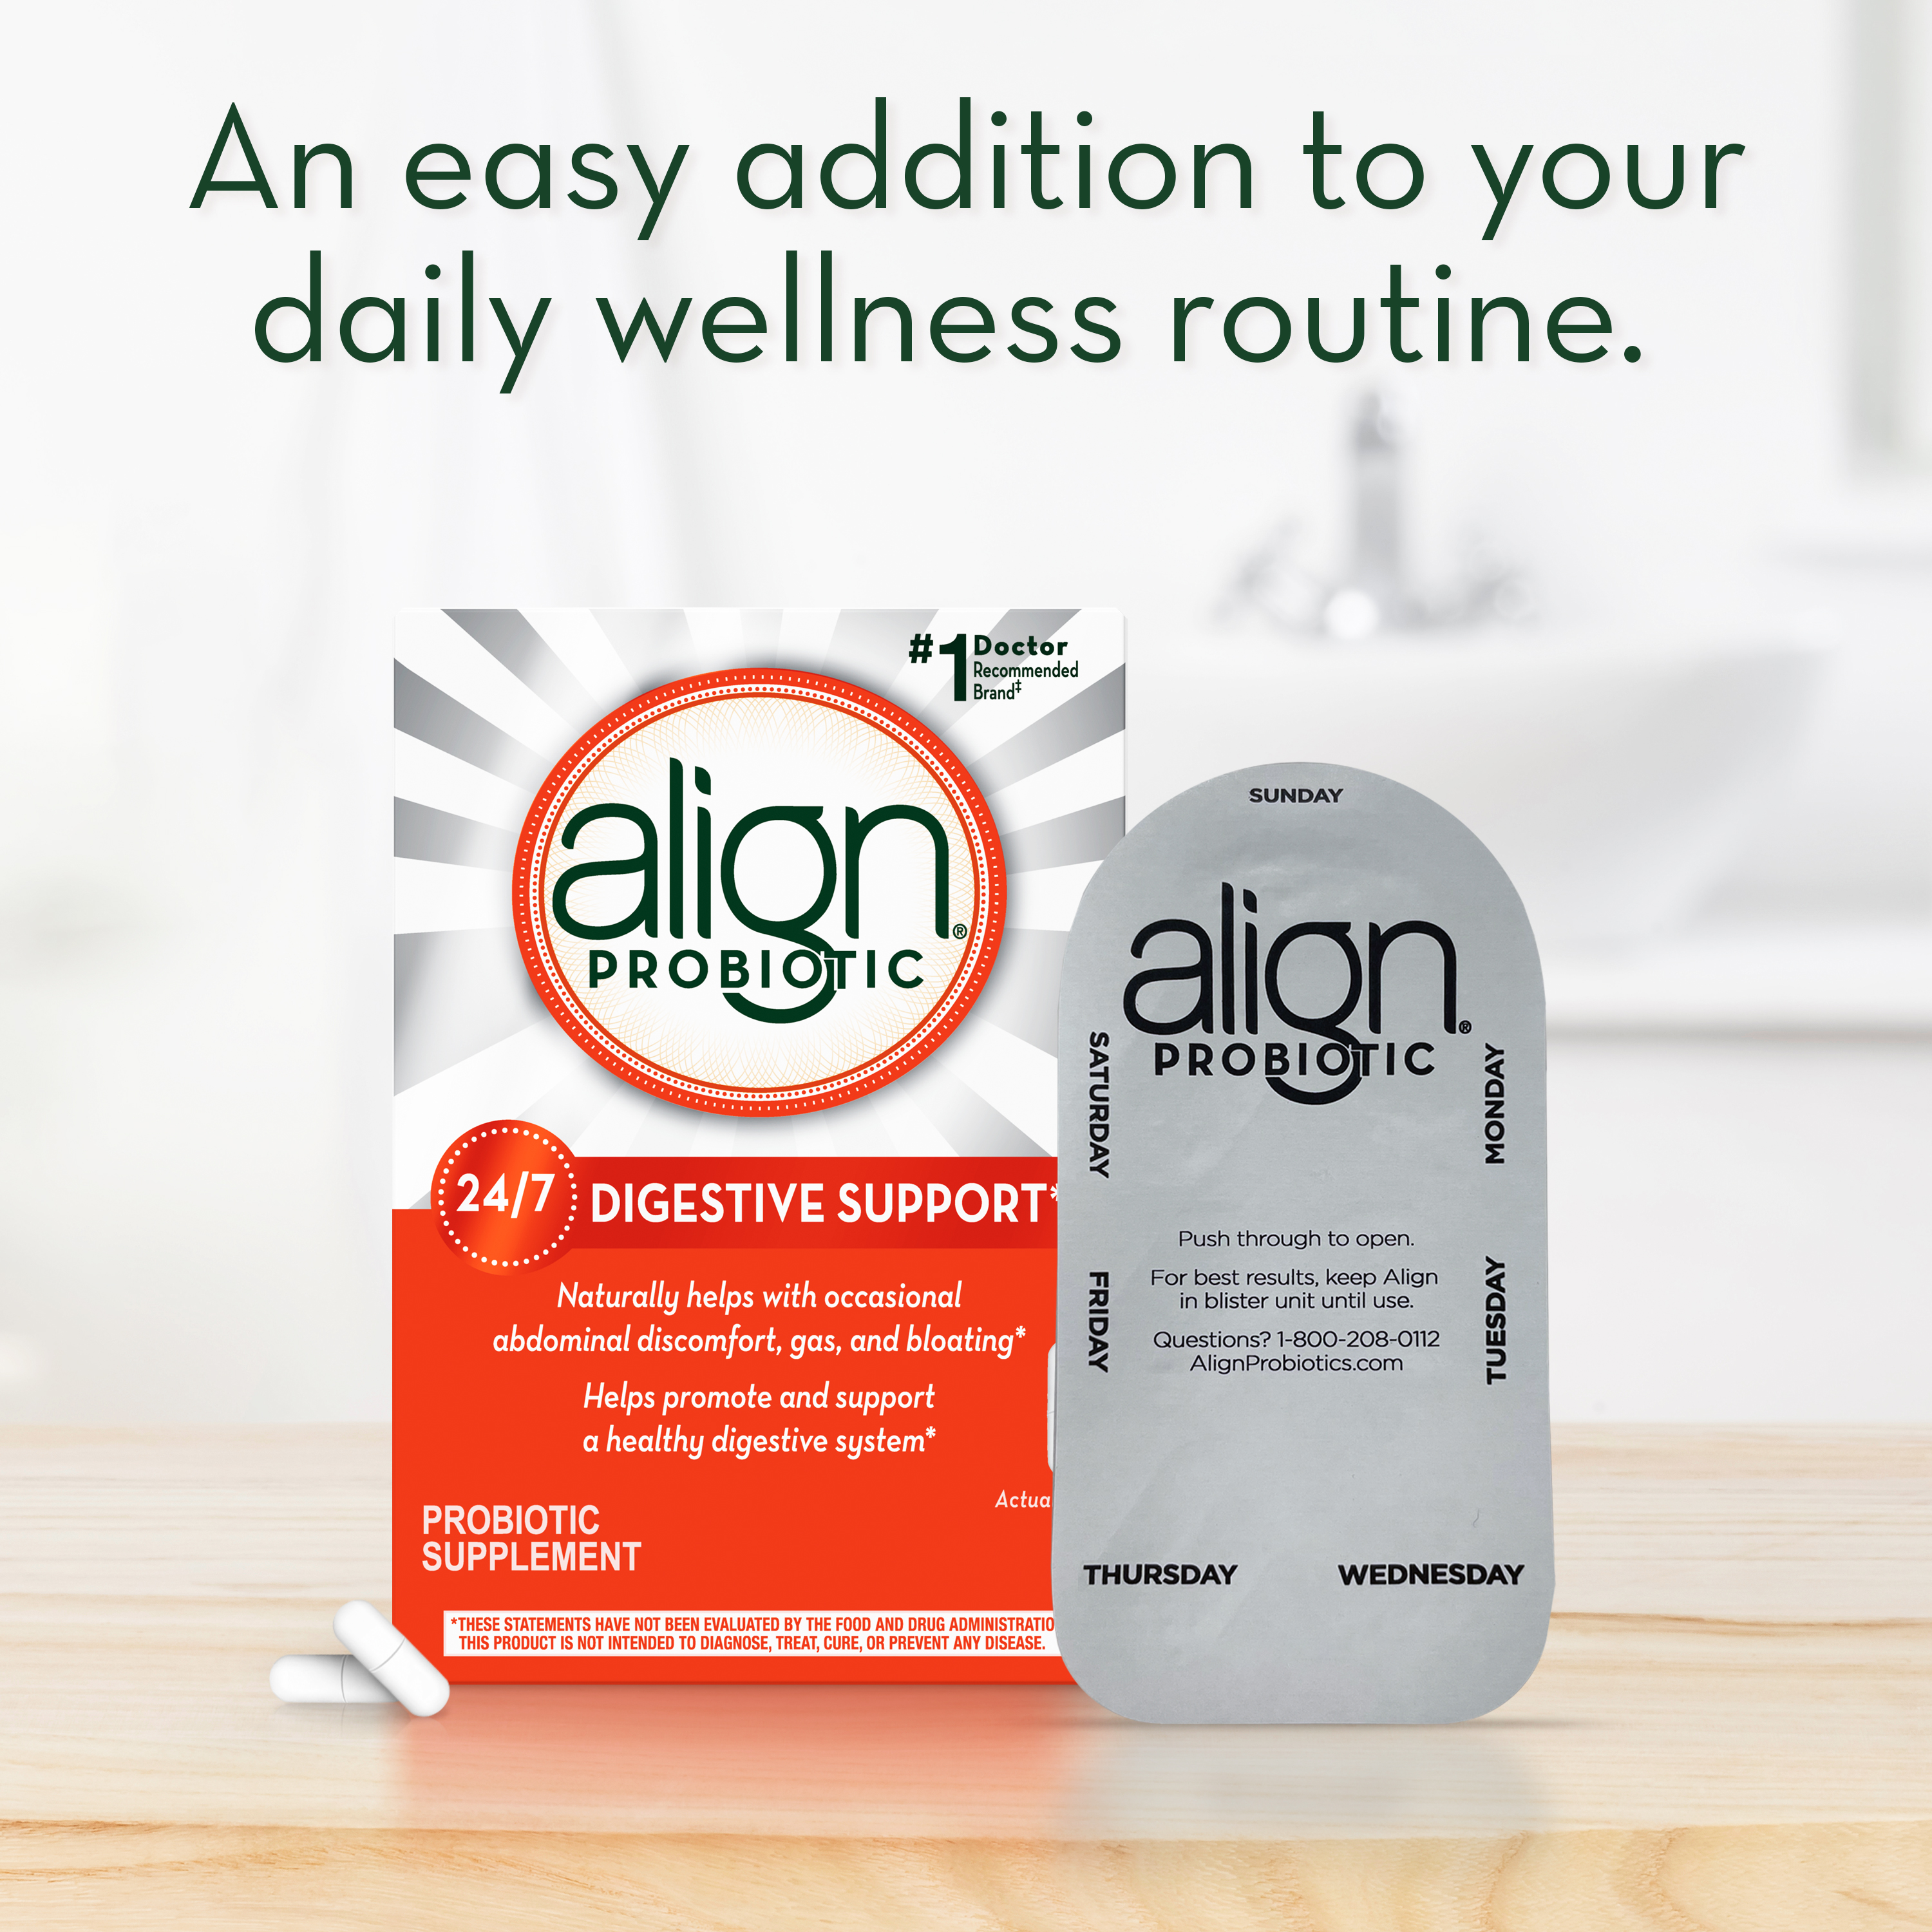 Align Probiotic Capsules, Men and Women's Daily Probiotic Supplement for Digestive Health, 28 Ct - image 4 of 11